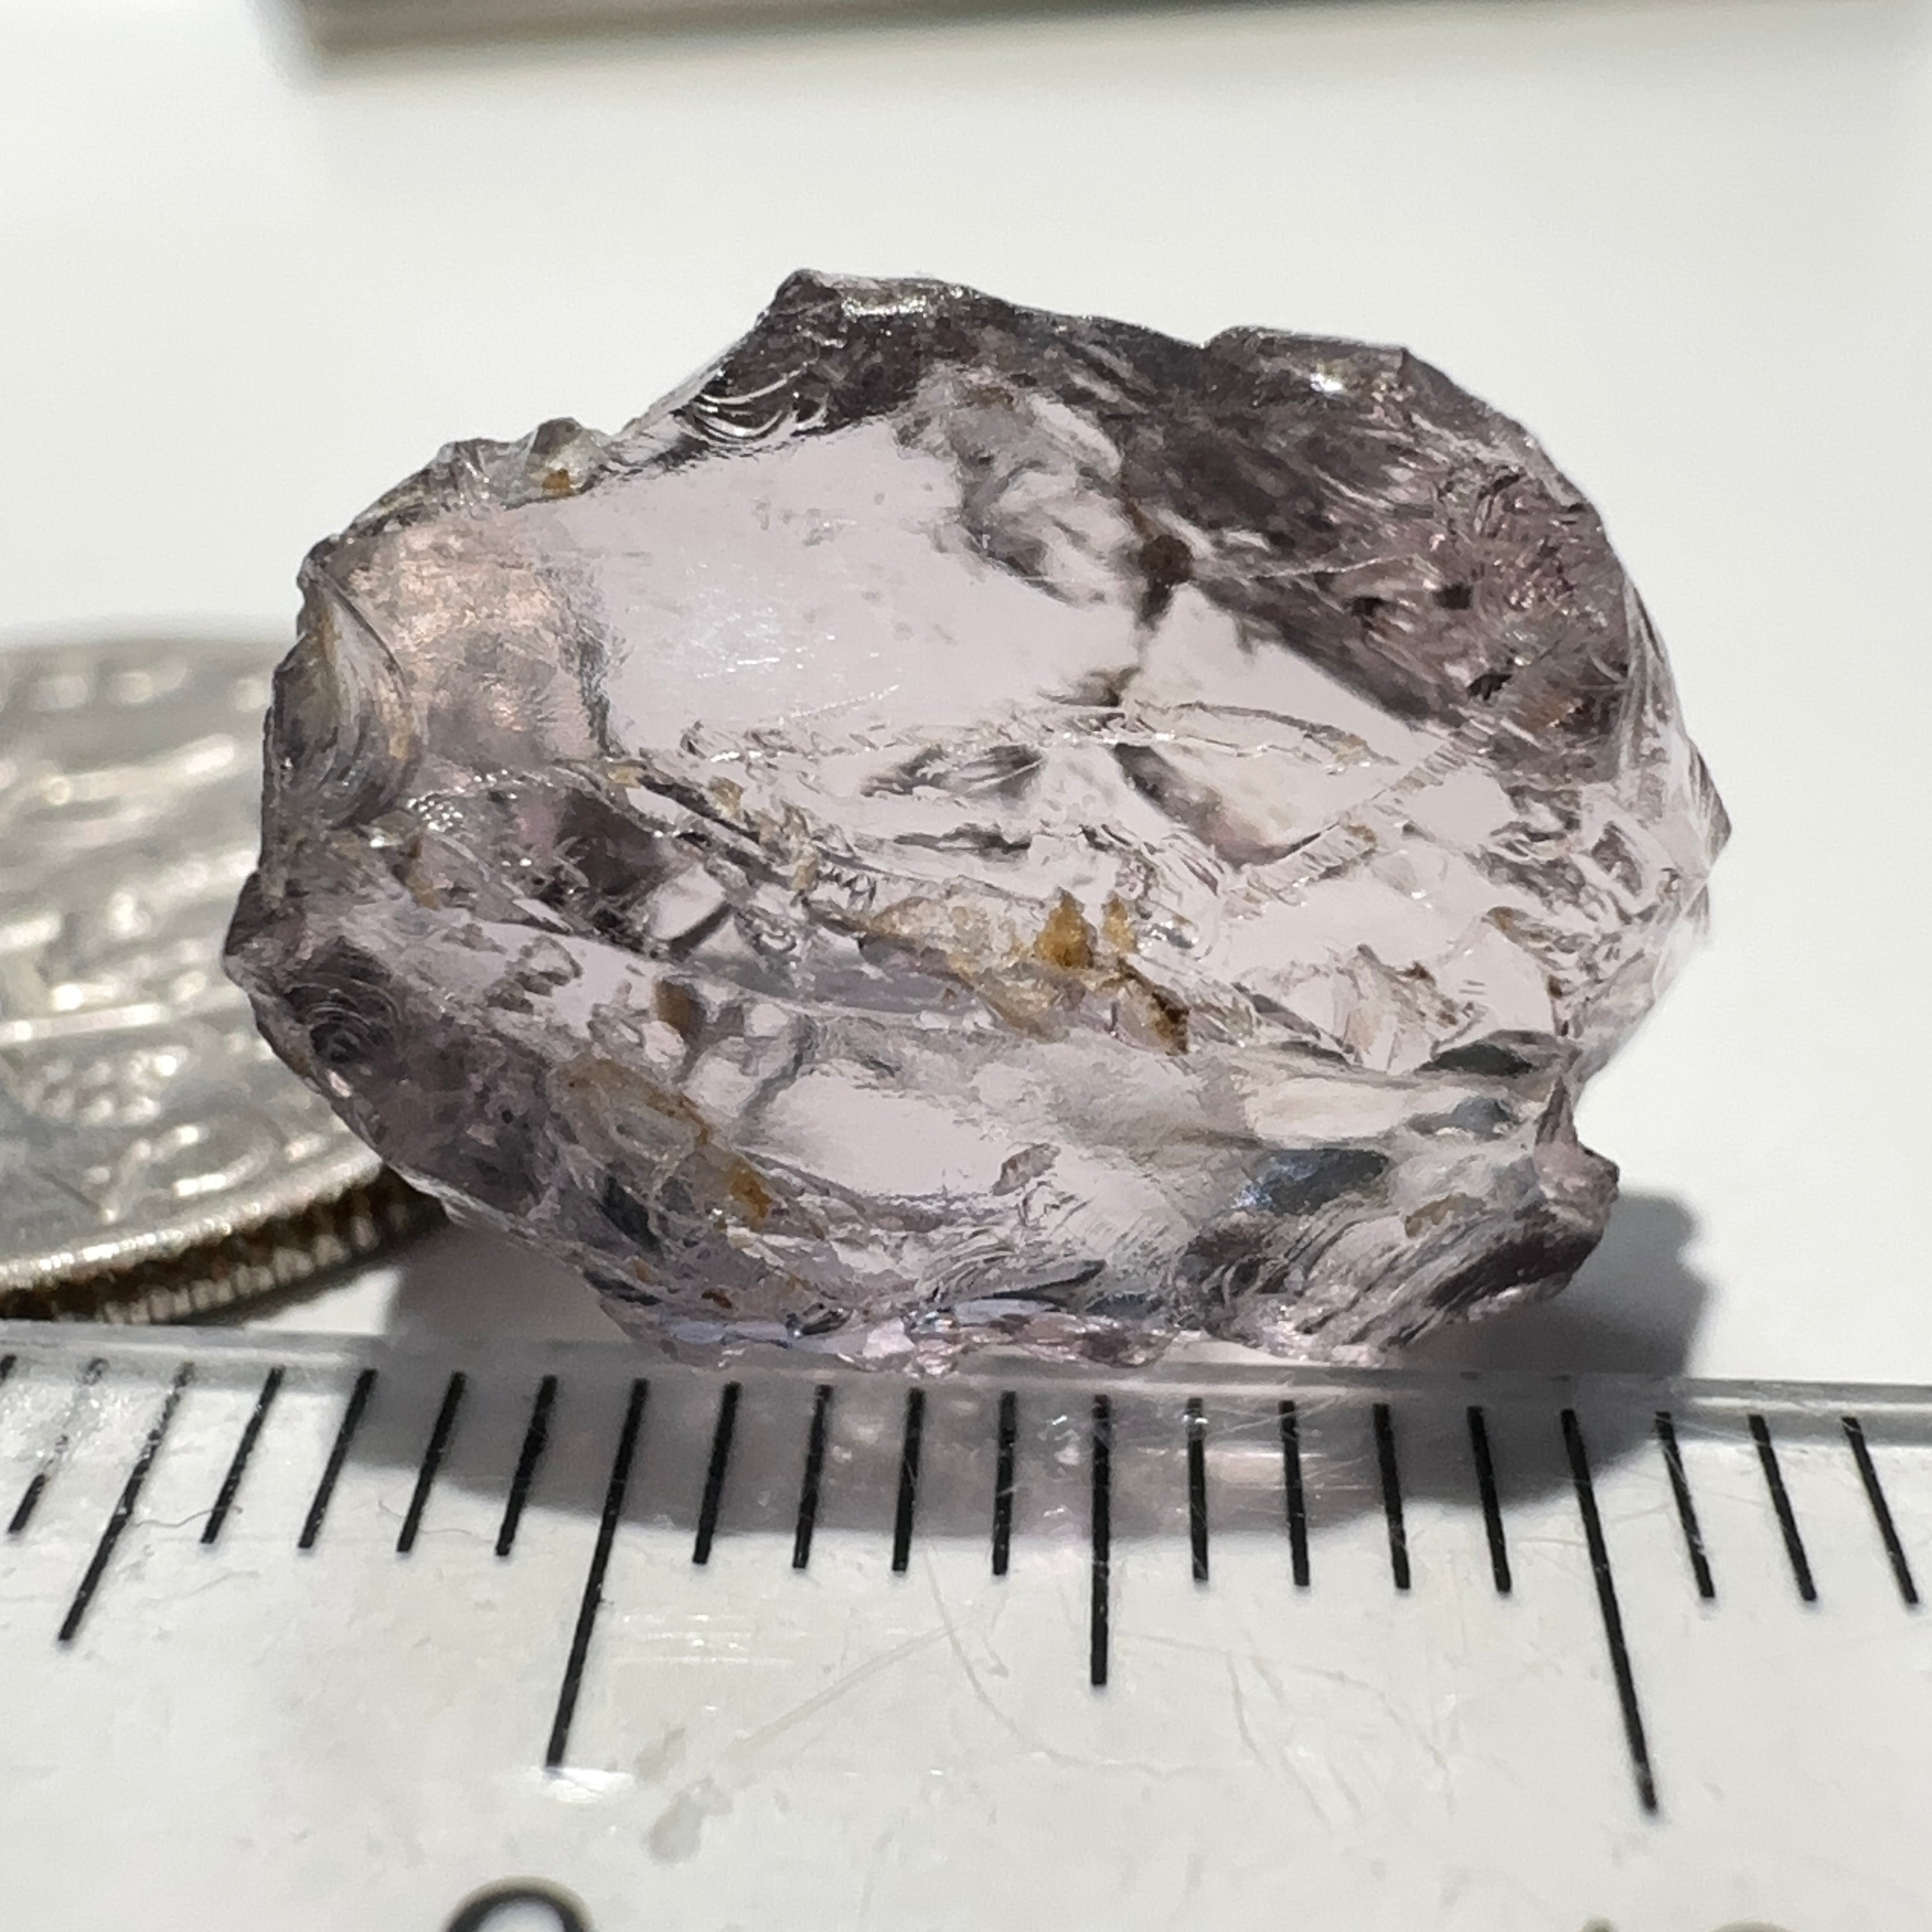 11.40ct Purple Scapolite Crystal, Tanzania, Untreated Unheated.slight issue on the outside that needs to be taken off on disk, rest VVS-IF clean